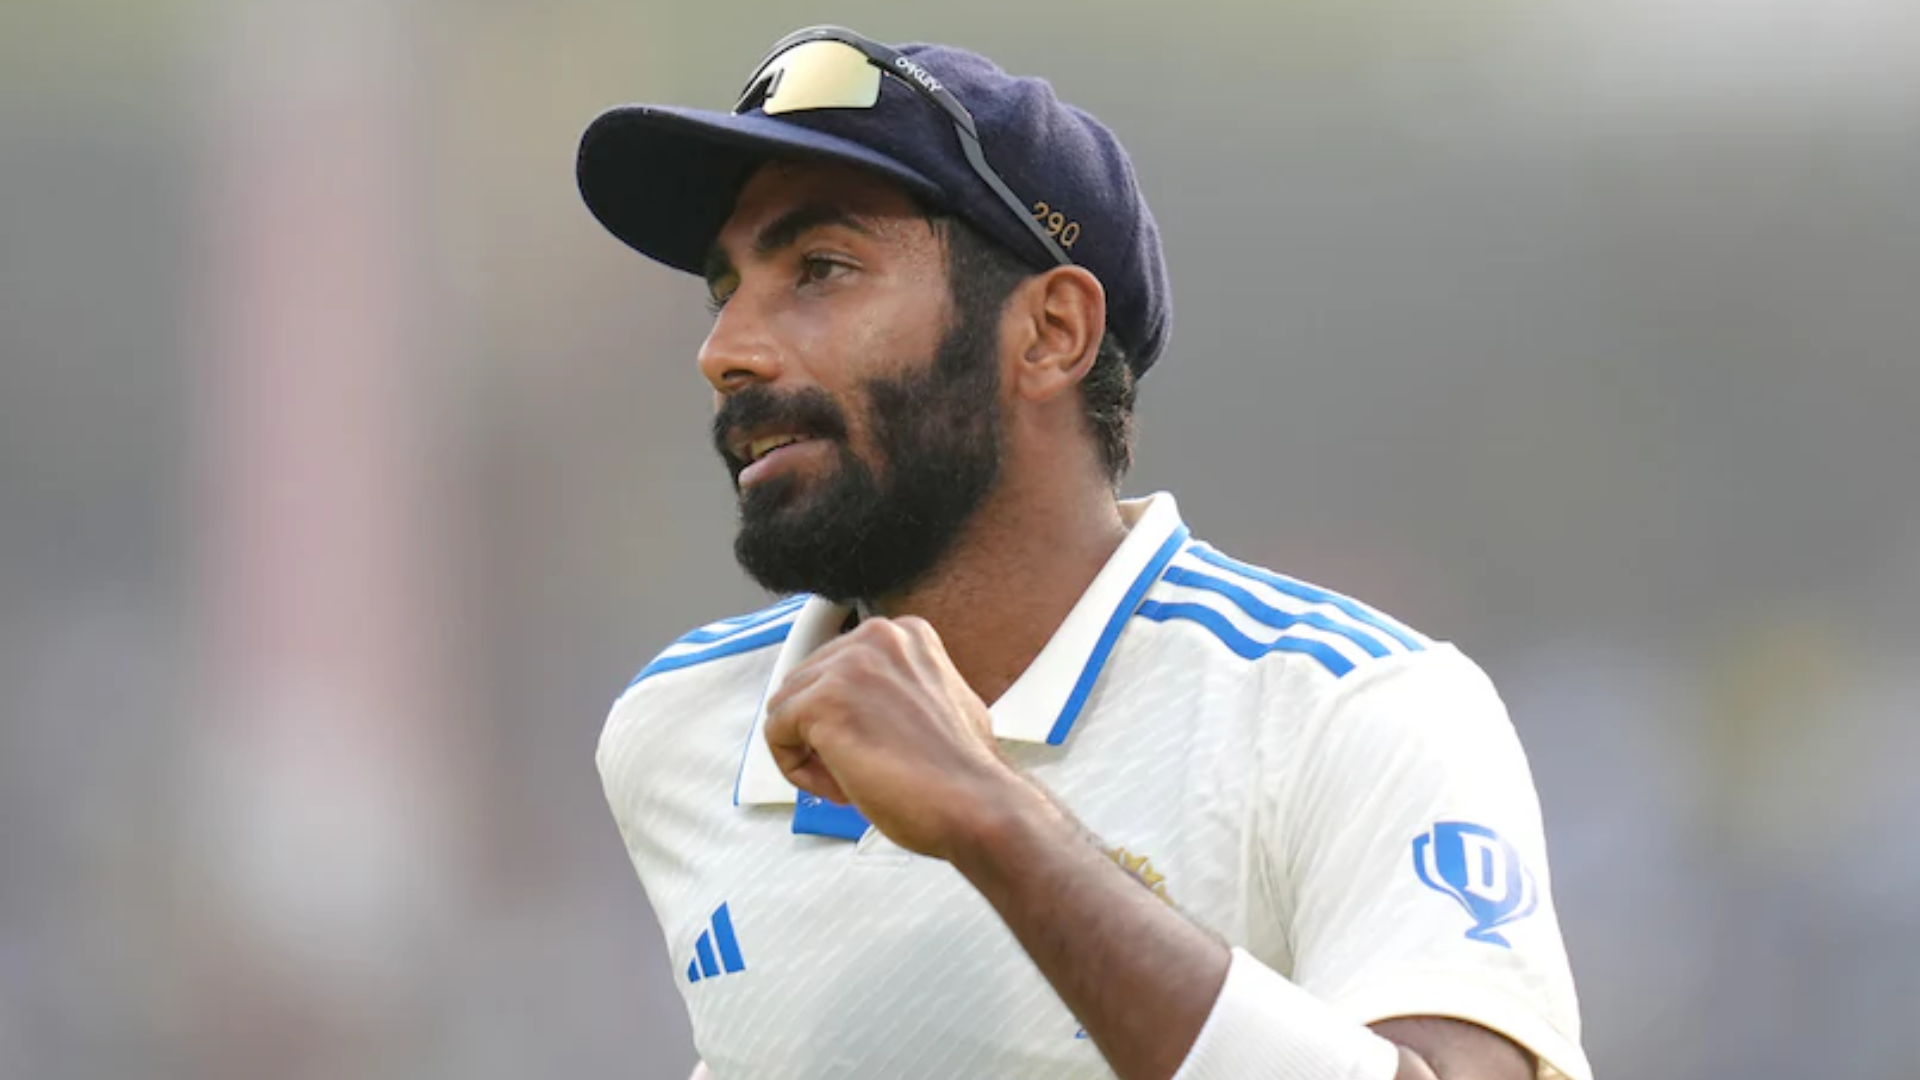 Ind vs Eng 4th Test: Jasprit Bumrah Likely To Be Replaced By Whom?